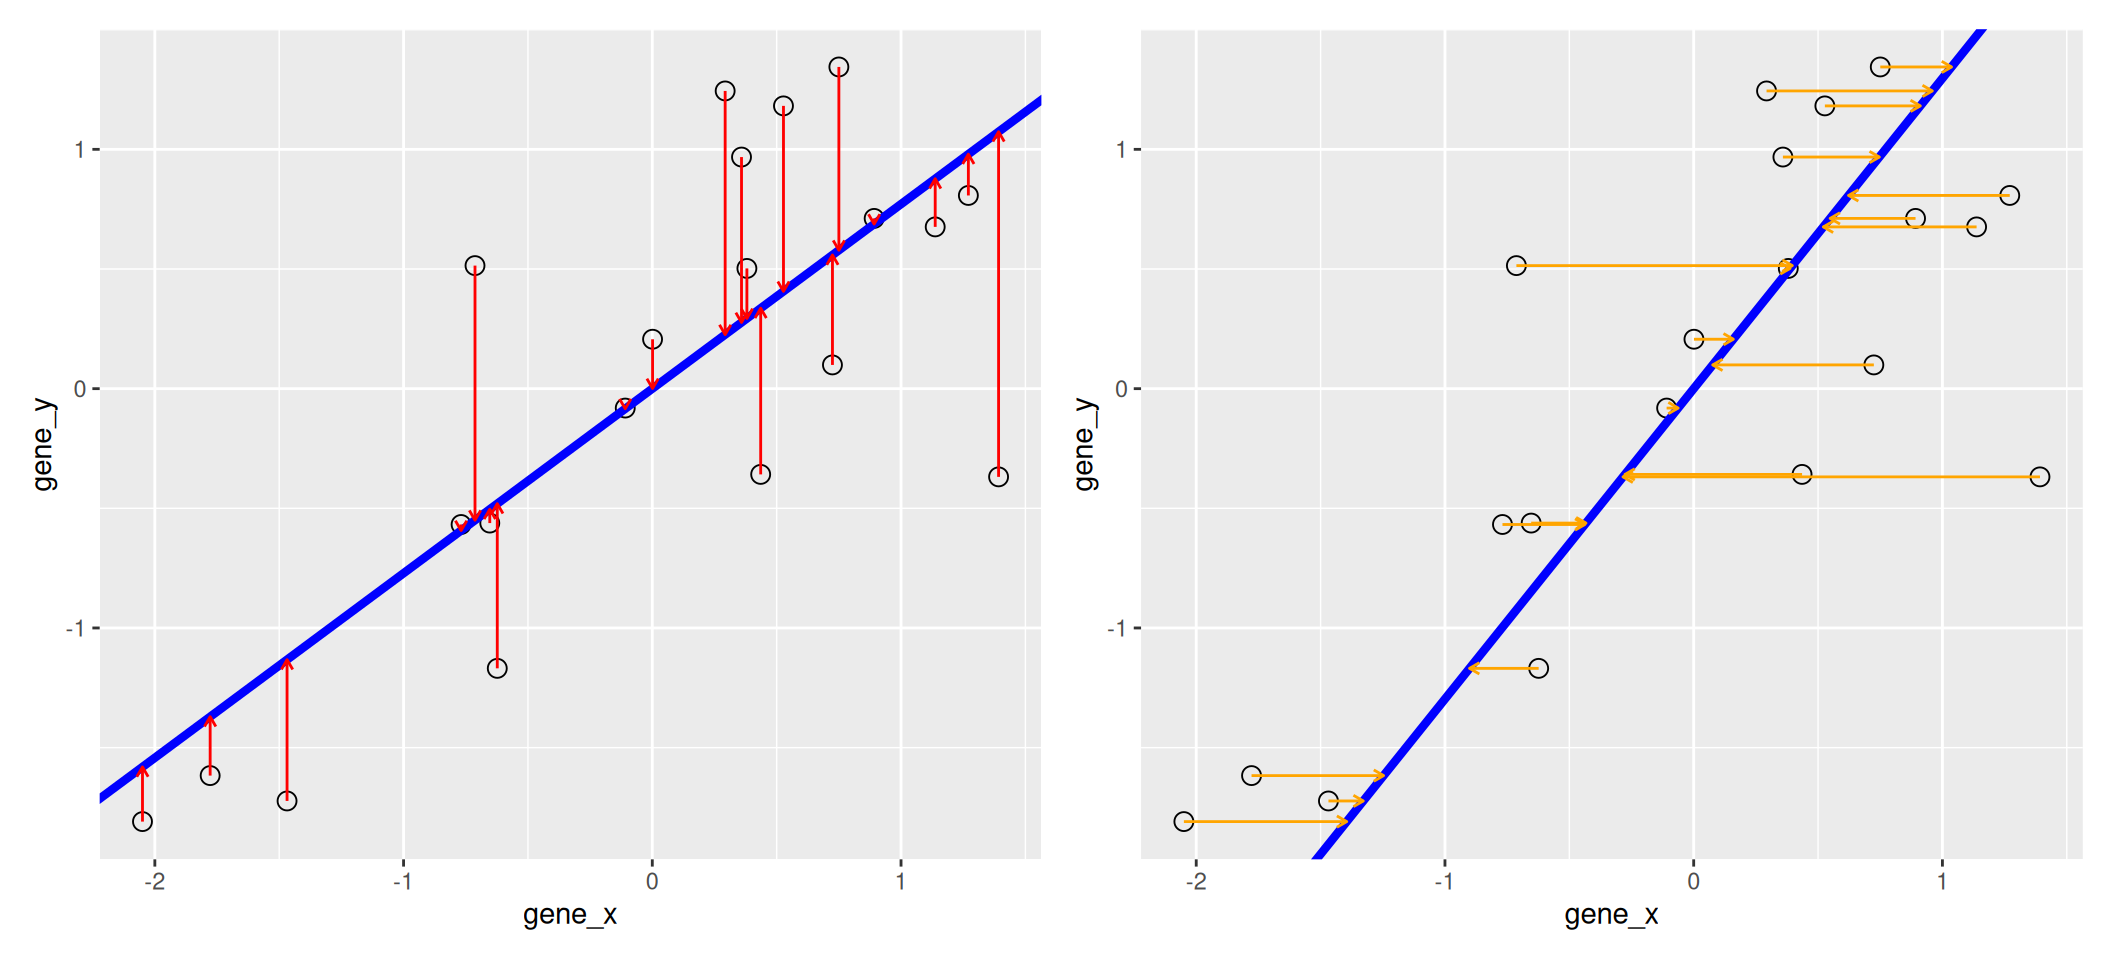 Regression of y onto x (left) minimisises the sums of squares of vertical residuals (red). Regression of x onto y (right) minimisises the sums of squares of horizontal residuals (orange).